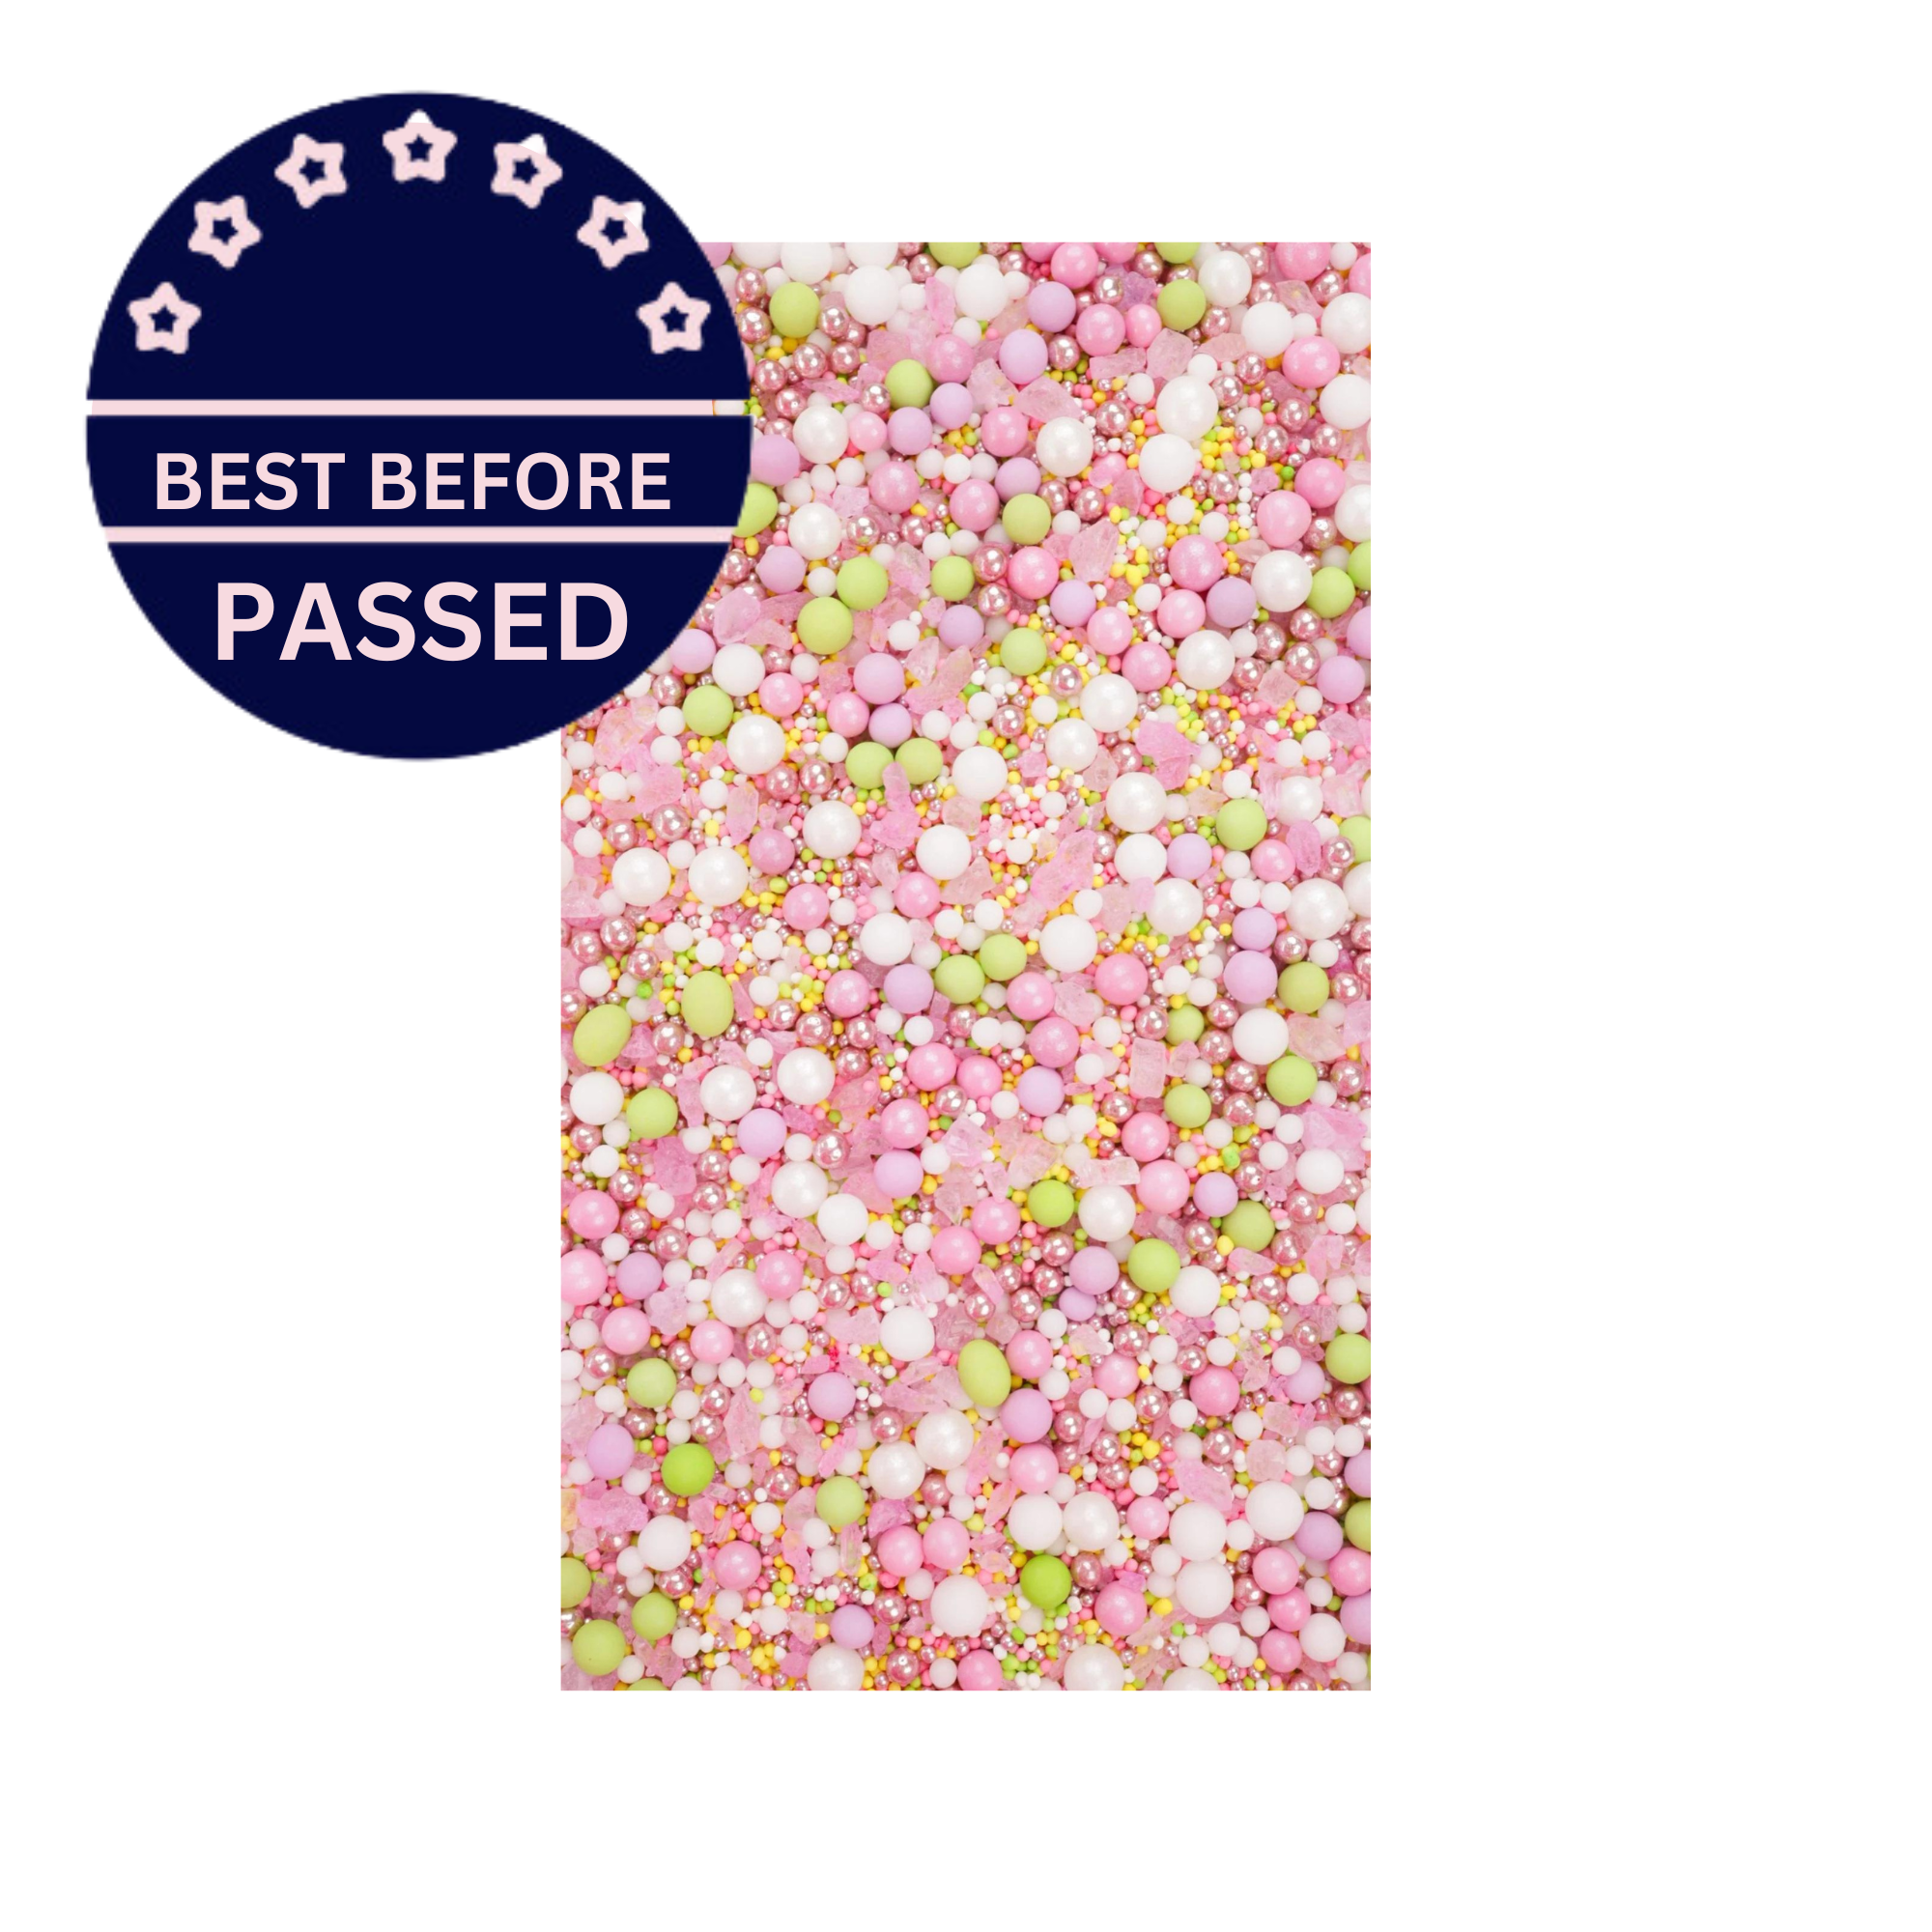 BB PASSED 06/24  Halo Sprinkles Luxury Blend - Mia - Colourful Pastels